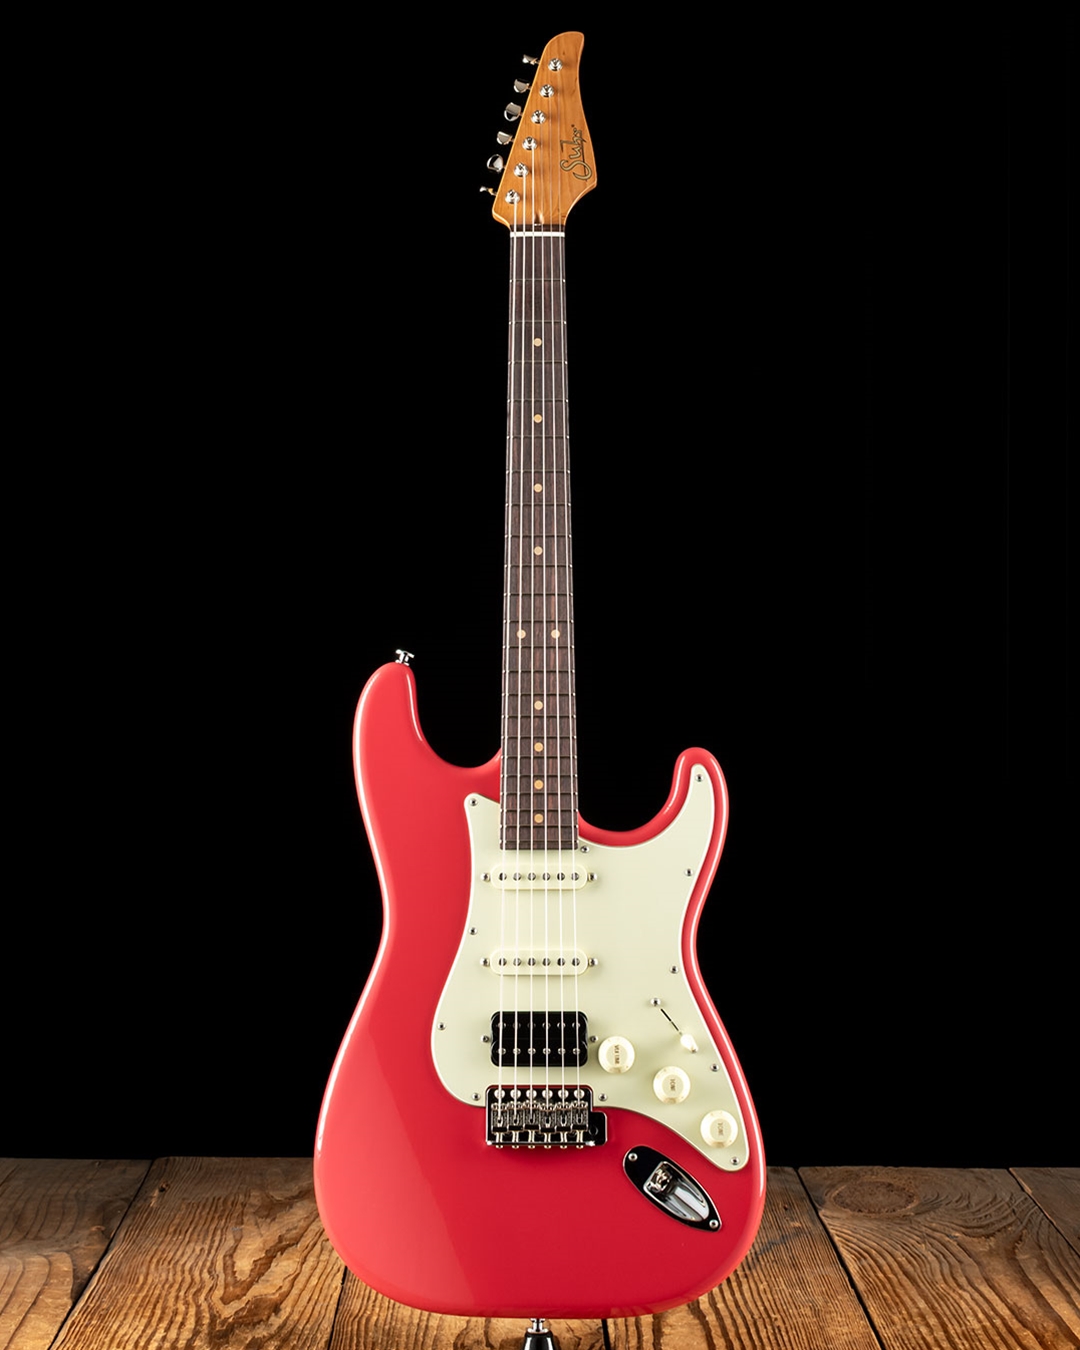 Suhr Classic S Vintage LE - Fiesta Red